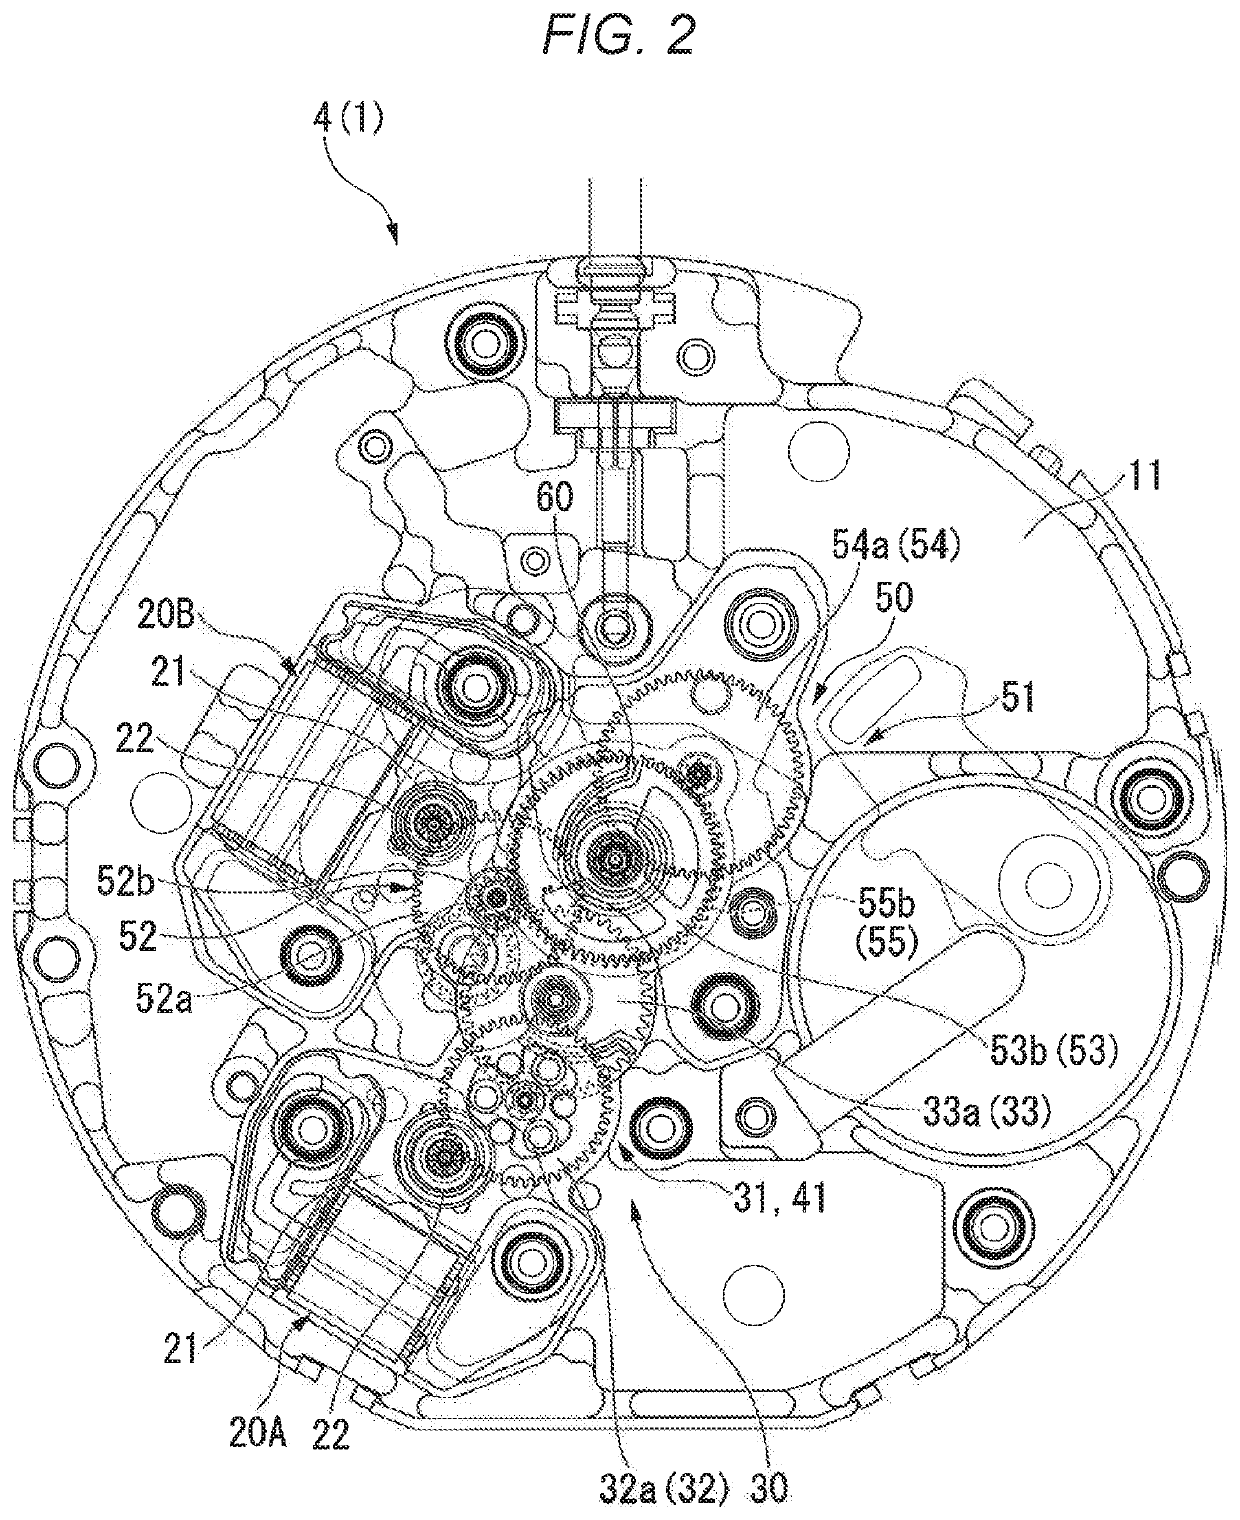 Timepiece movement and timepiece